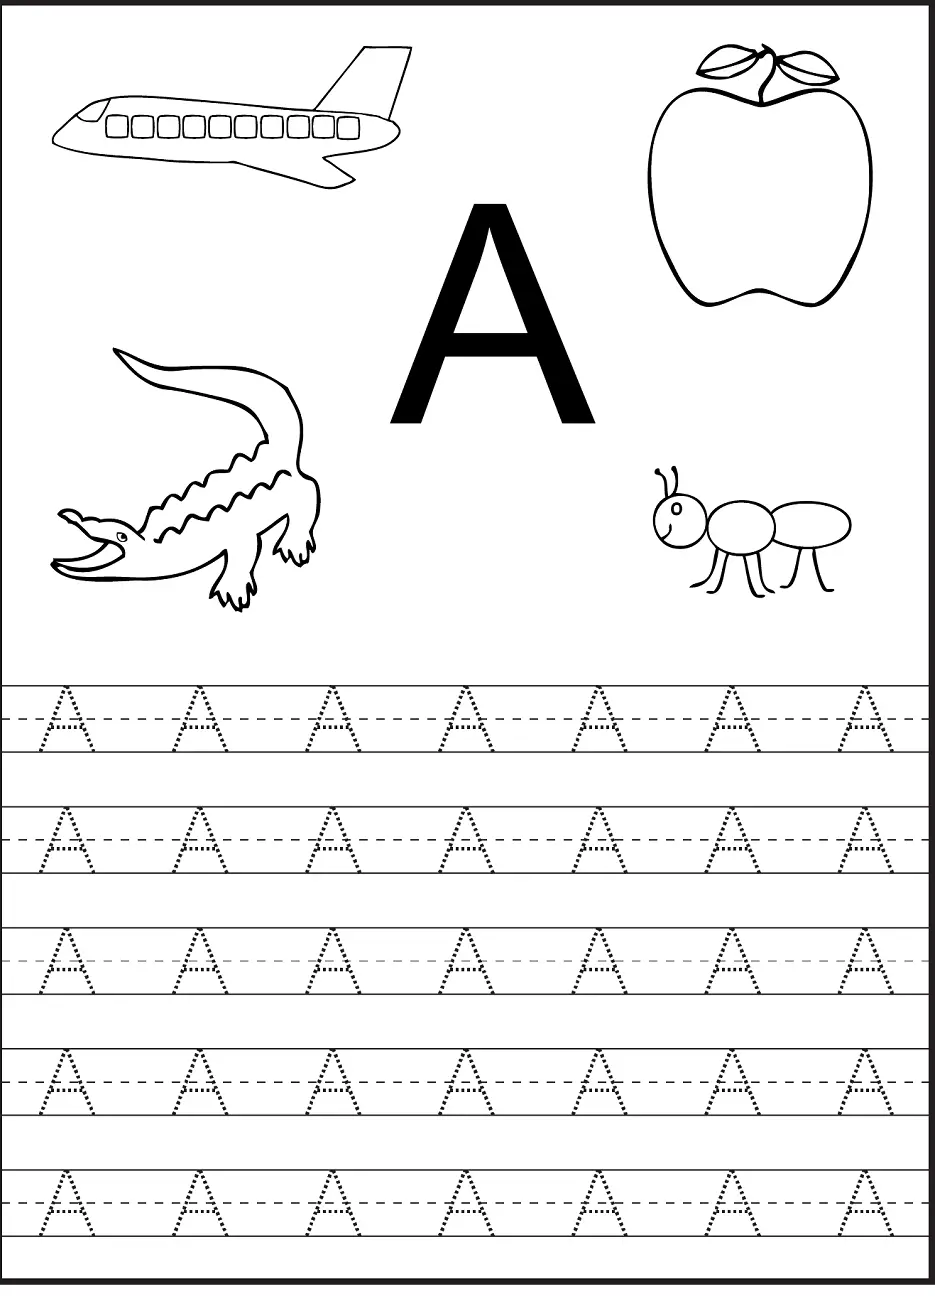 17 Kid-Friendly Letter 'A' Worksheets | KittyBabyLove.com